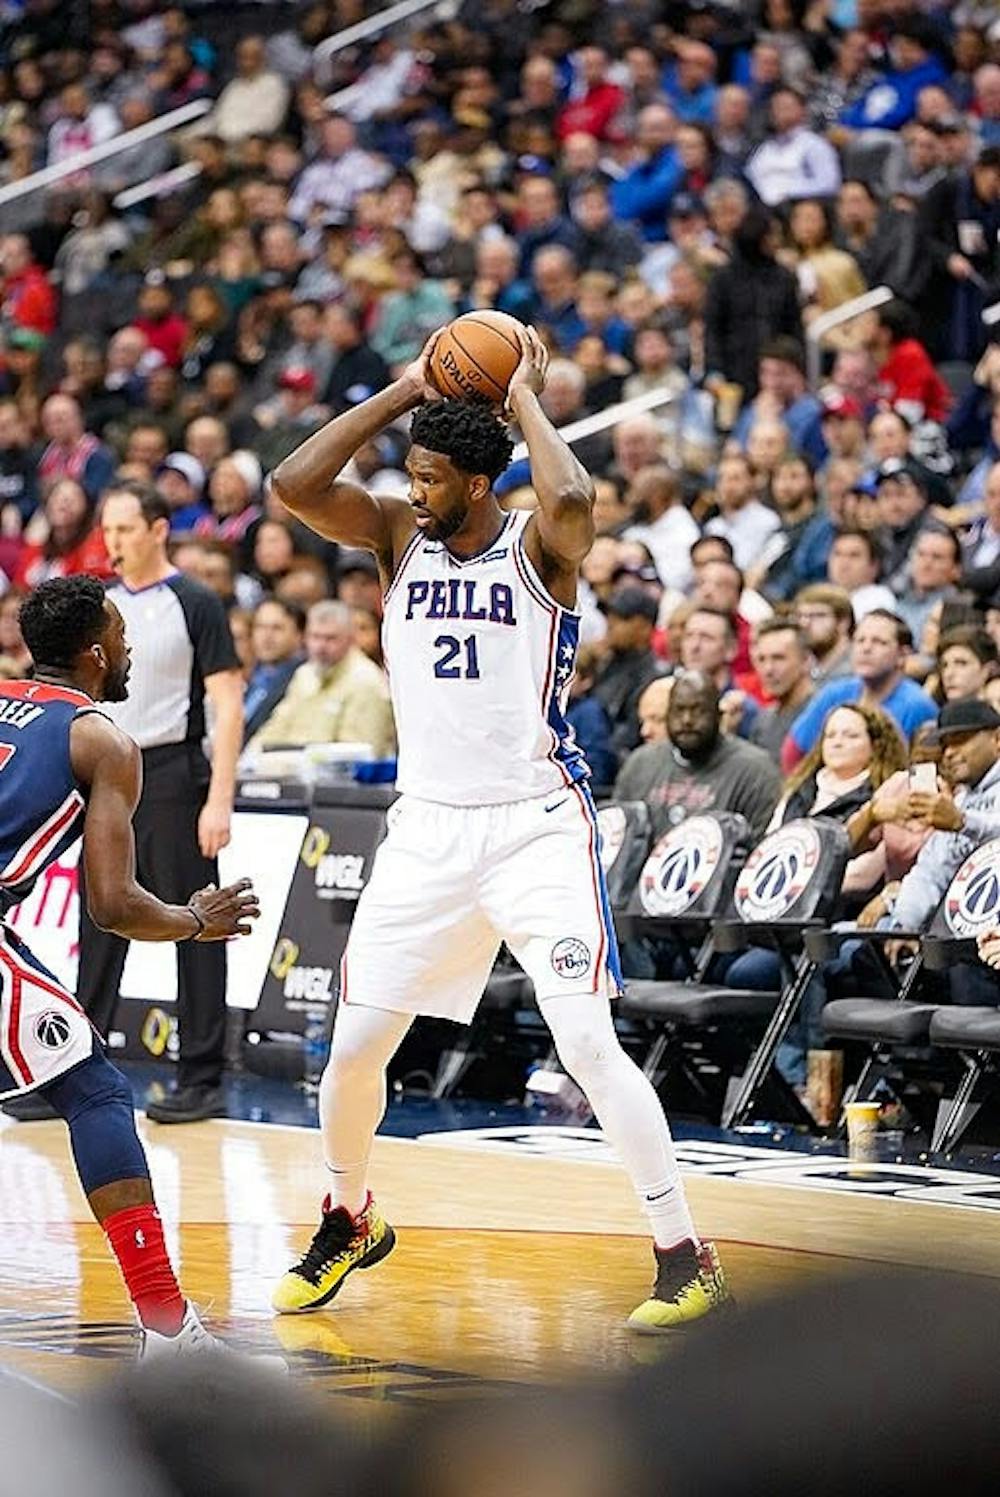 Philadelphia 76ers’ center Joel Embiid is in the midst of one of the greatest individual scoring seasons of all time (Photo courtesy of Paul Browse / Flickr).